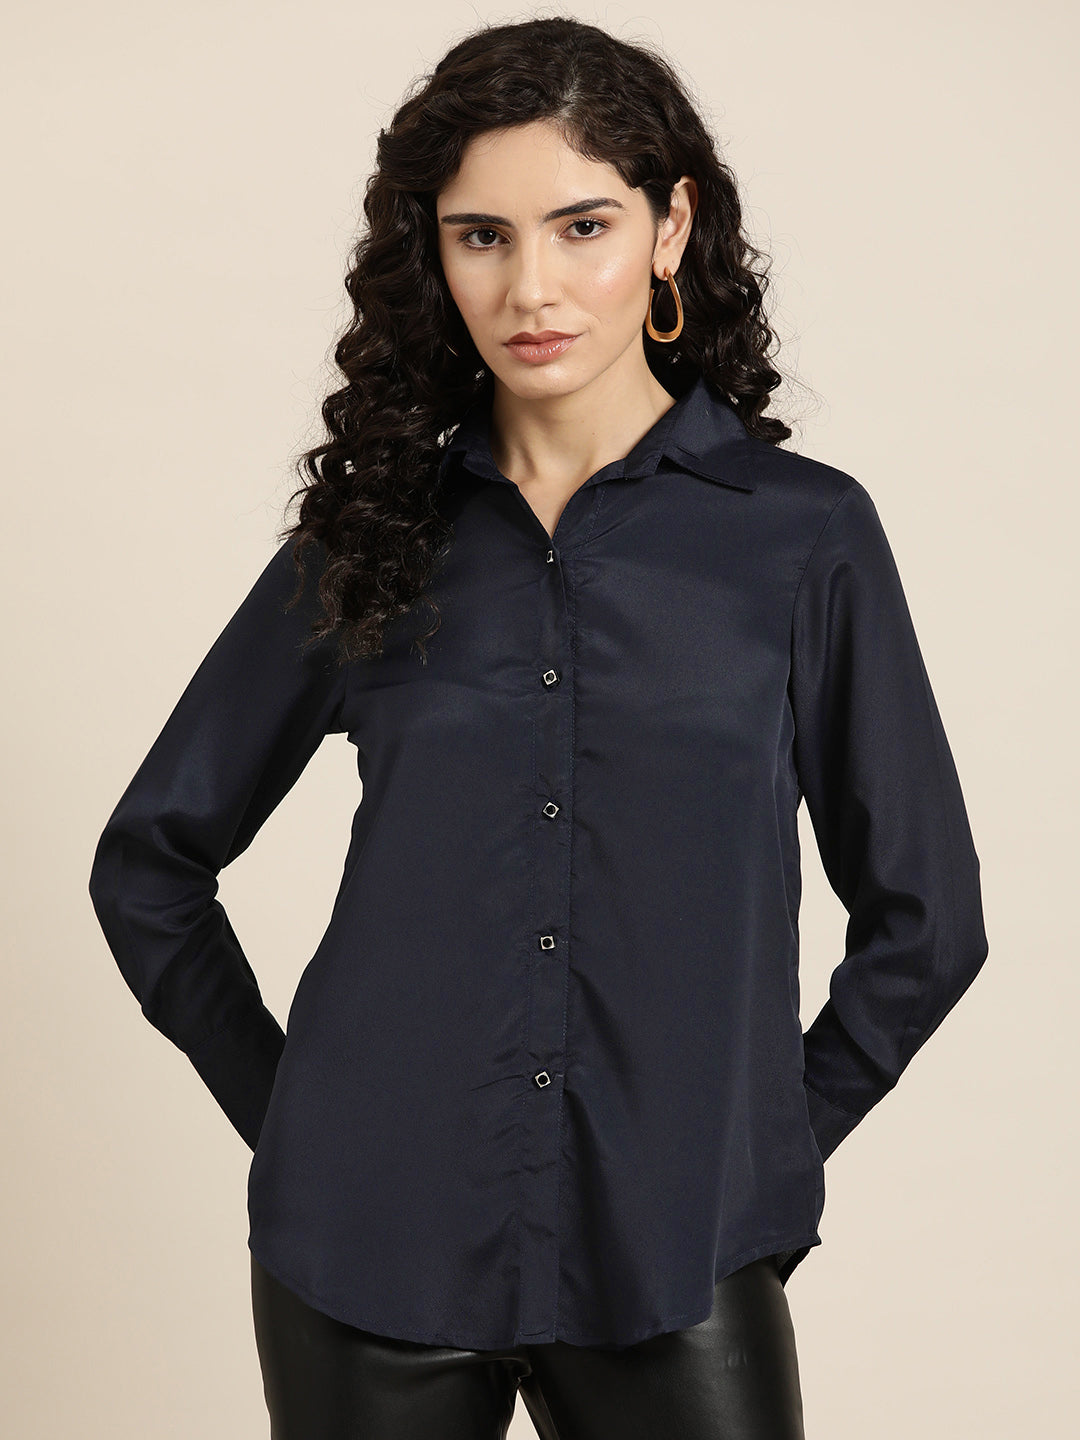 Navy blue Embelished button Party shirt